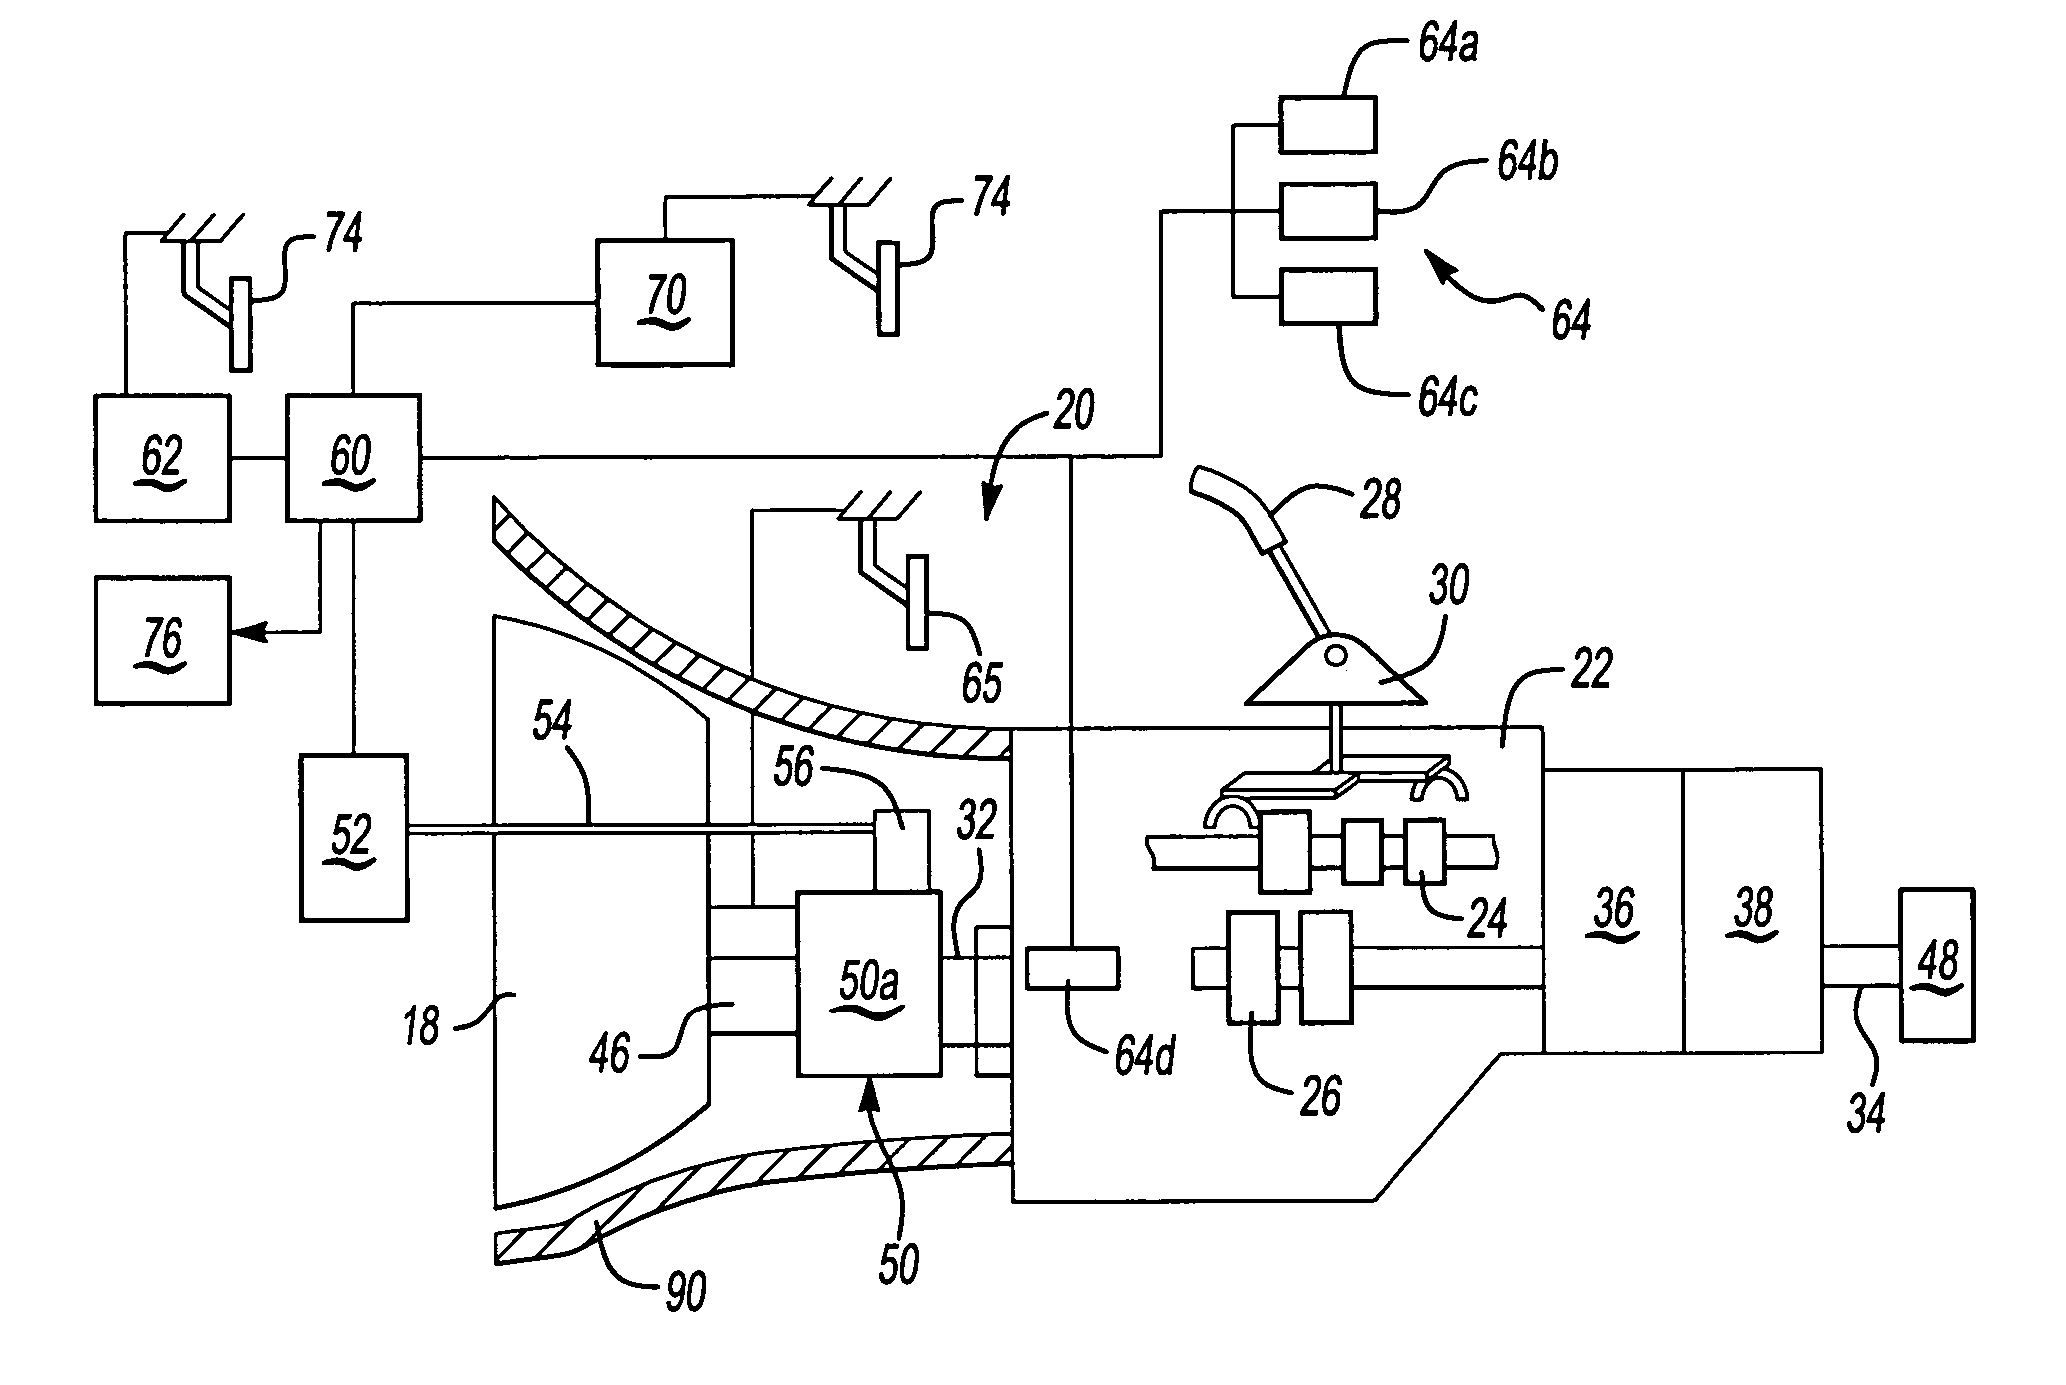 Vehicle transmission system with coast controls